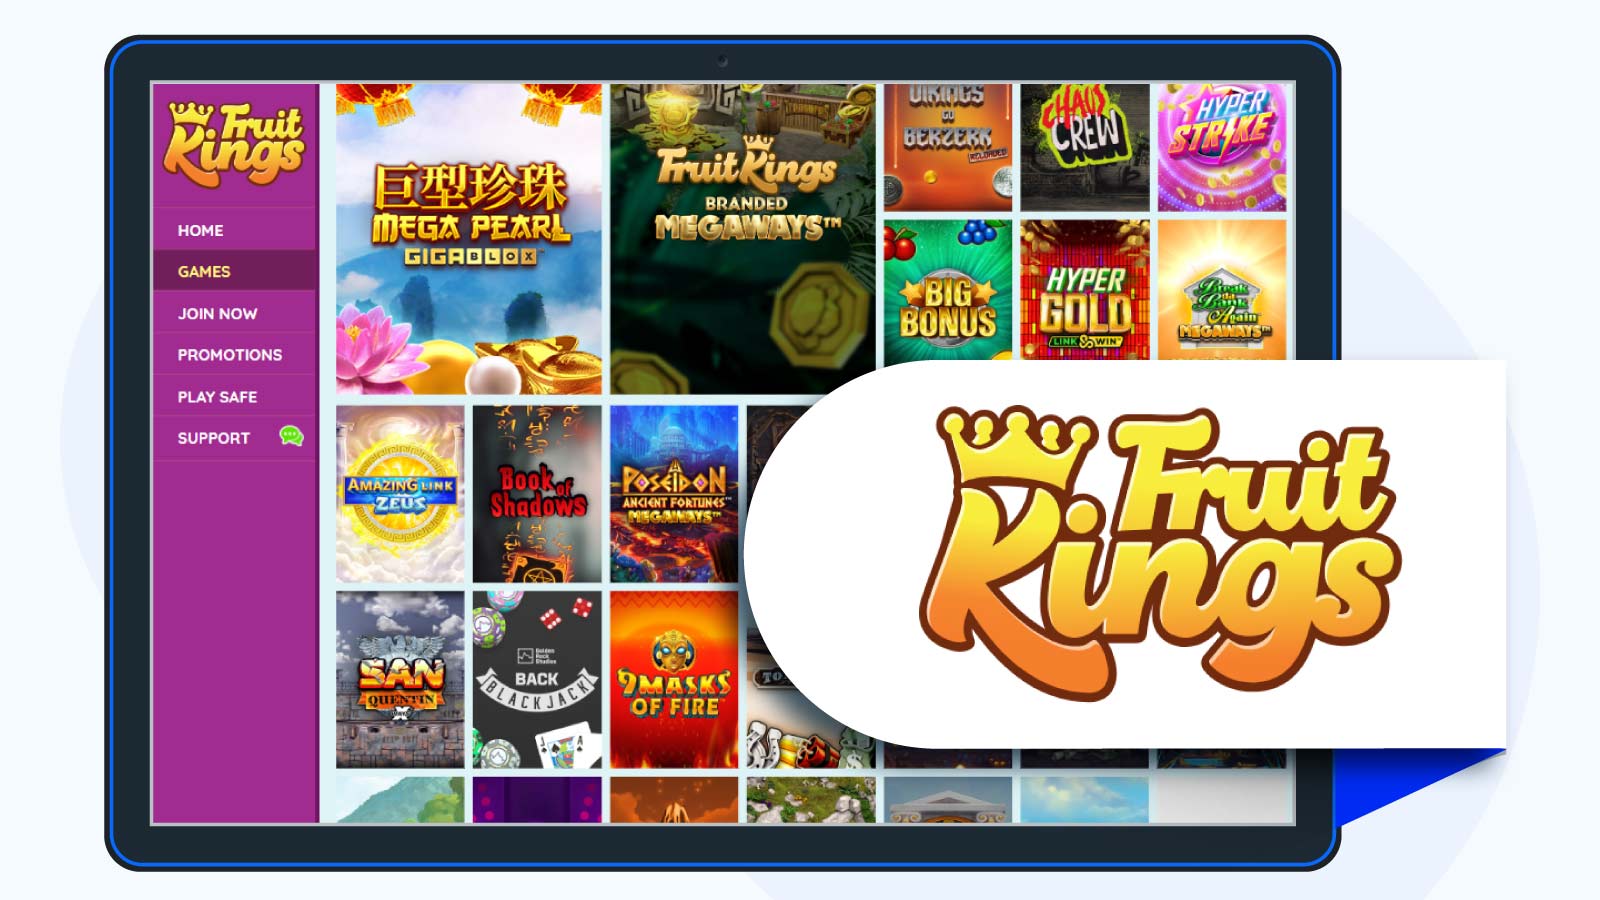 FruitKings Casino User’s Choice